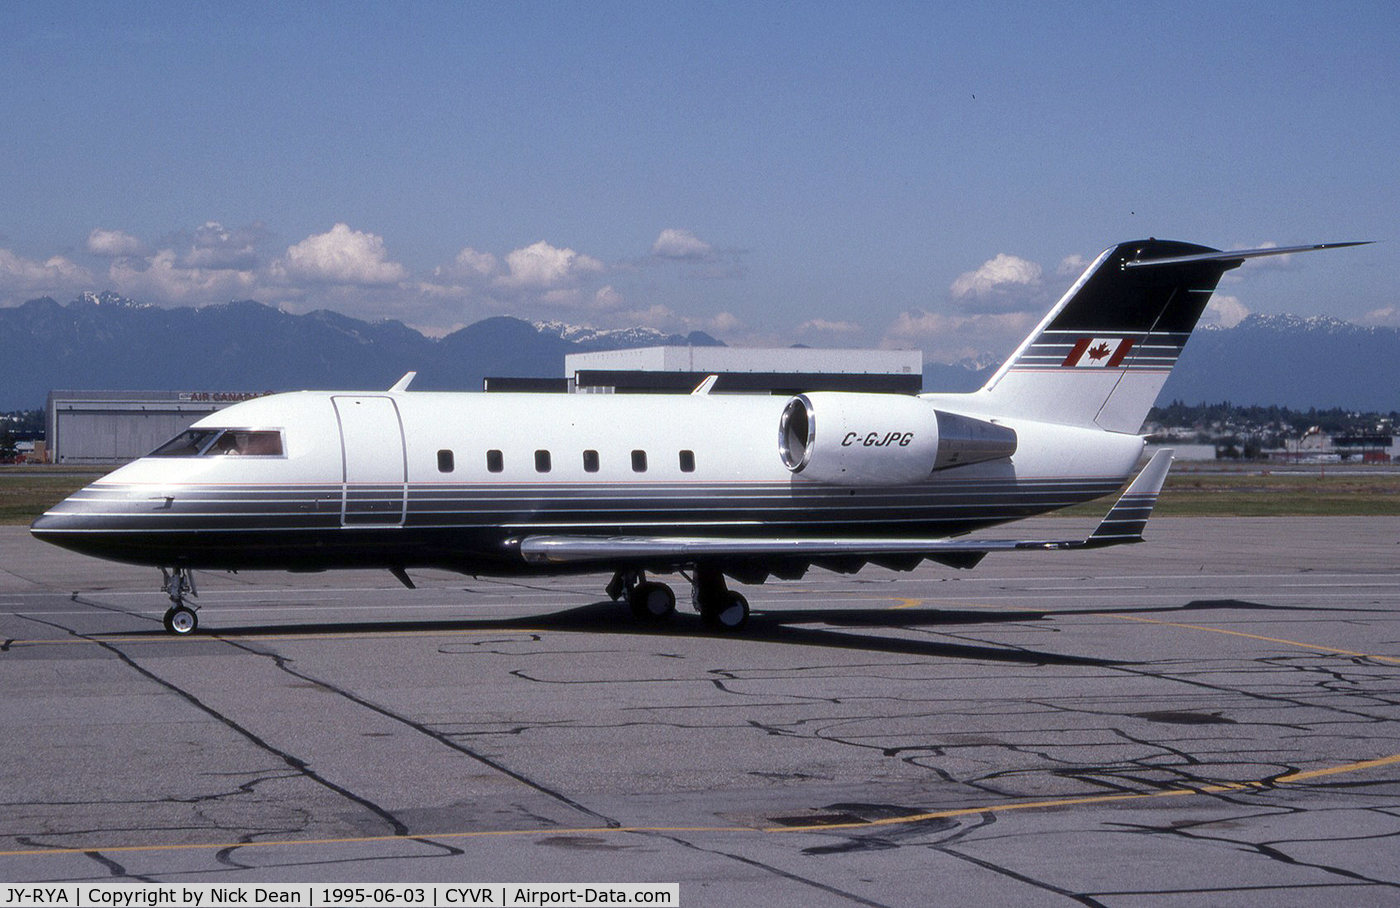 JY-RYA, 1983 Canadair Challenger 601 (CL-600-2A12) C/N 3017, CYVR (Seen here as C-GJPG reg is currently on a DA900 the CL601 is now in Jordan registered JY-RYA as posted for C/N accuracy)